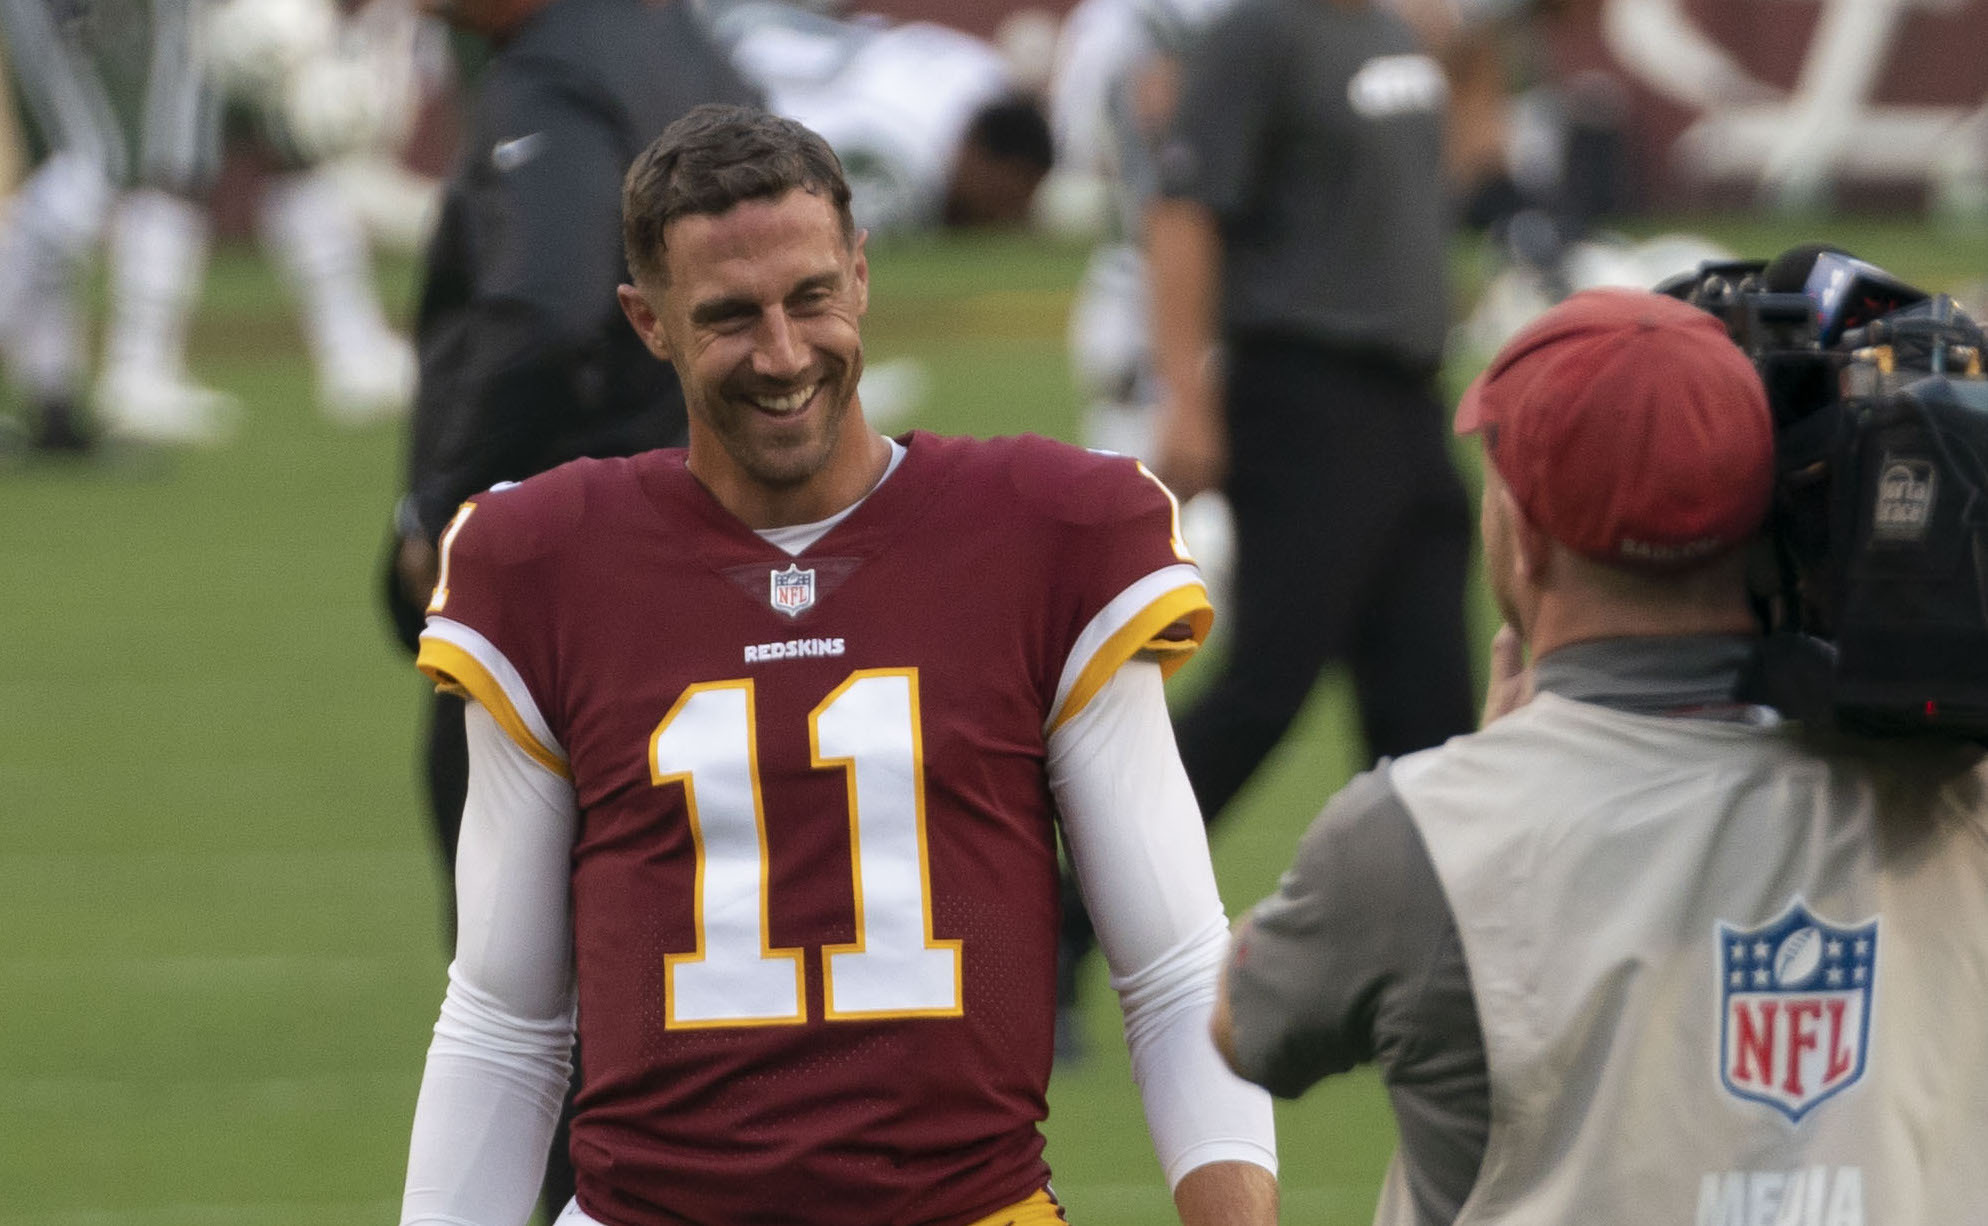 5 Fun Facts About Alex Smith